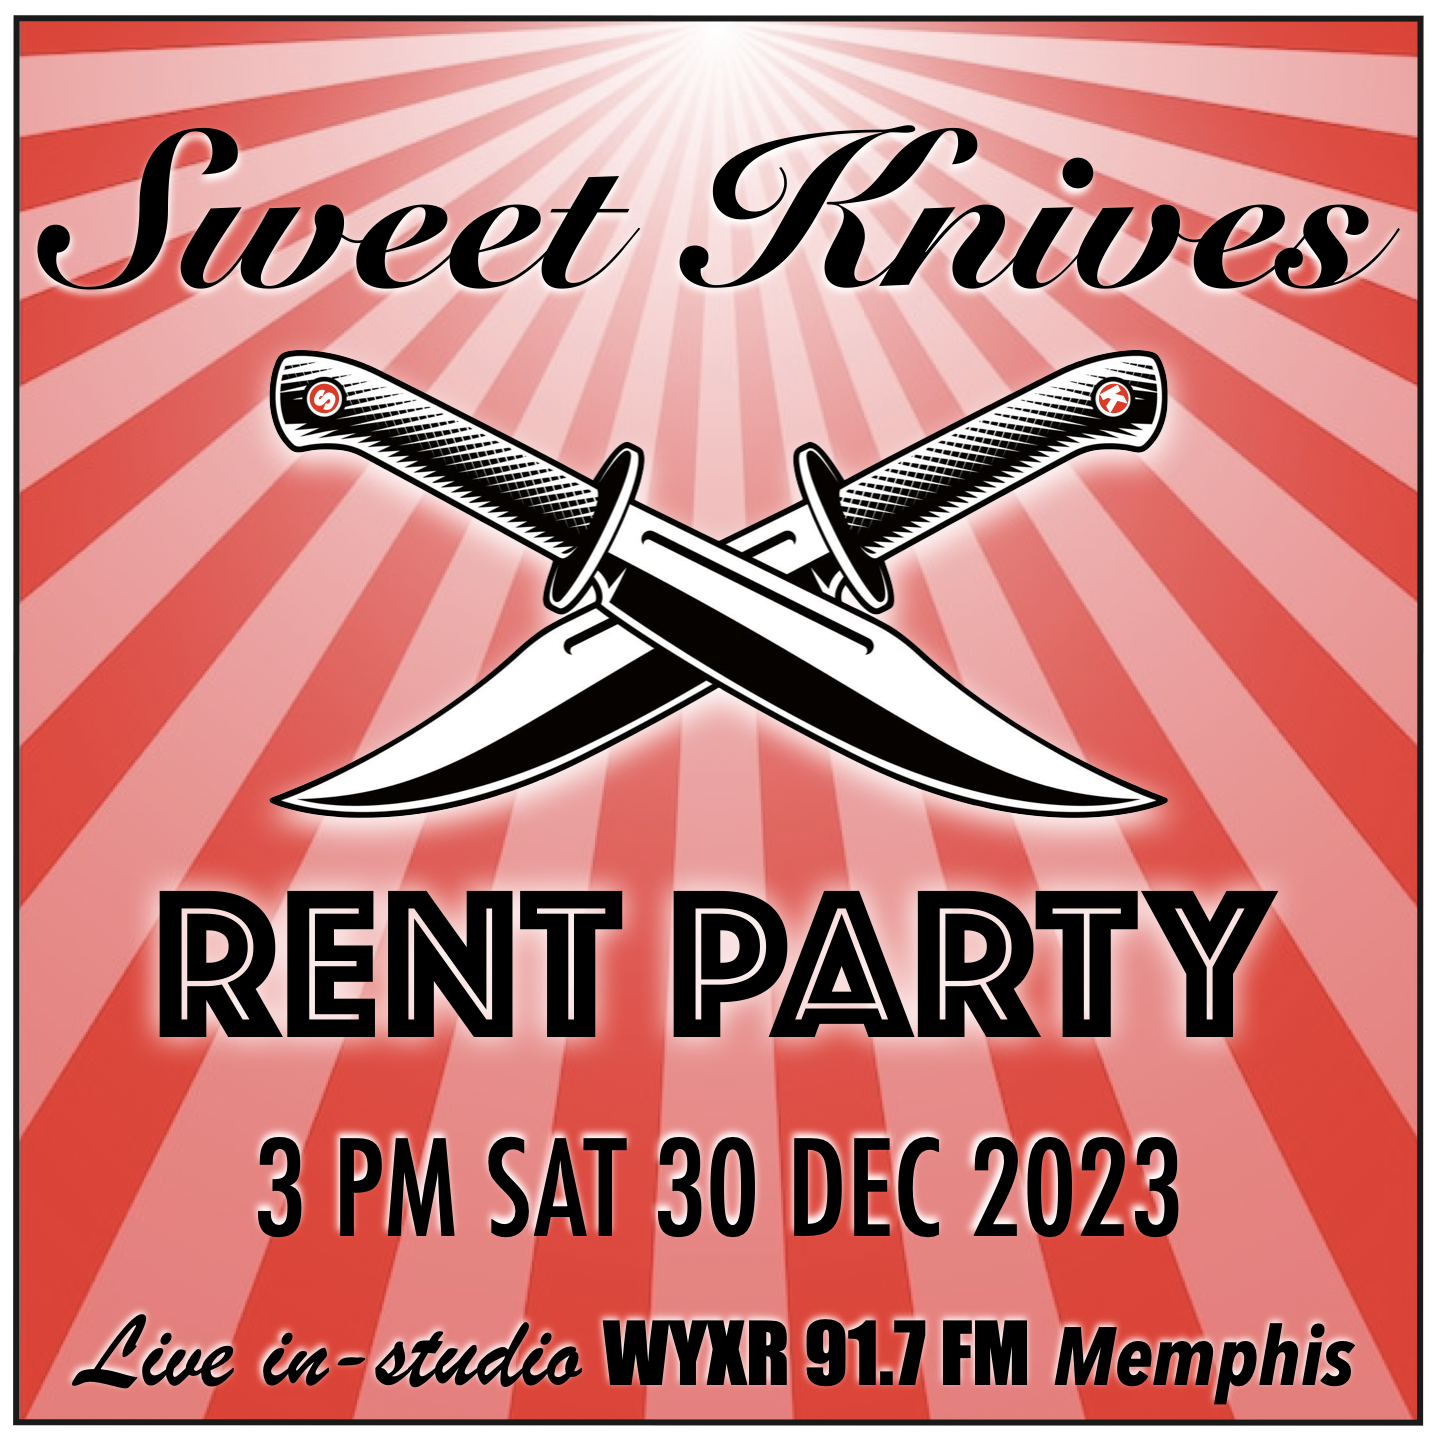 Rent Party: Sweet Knives